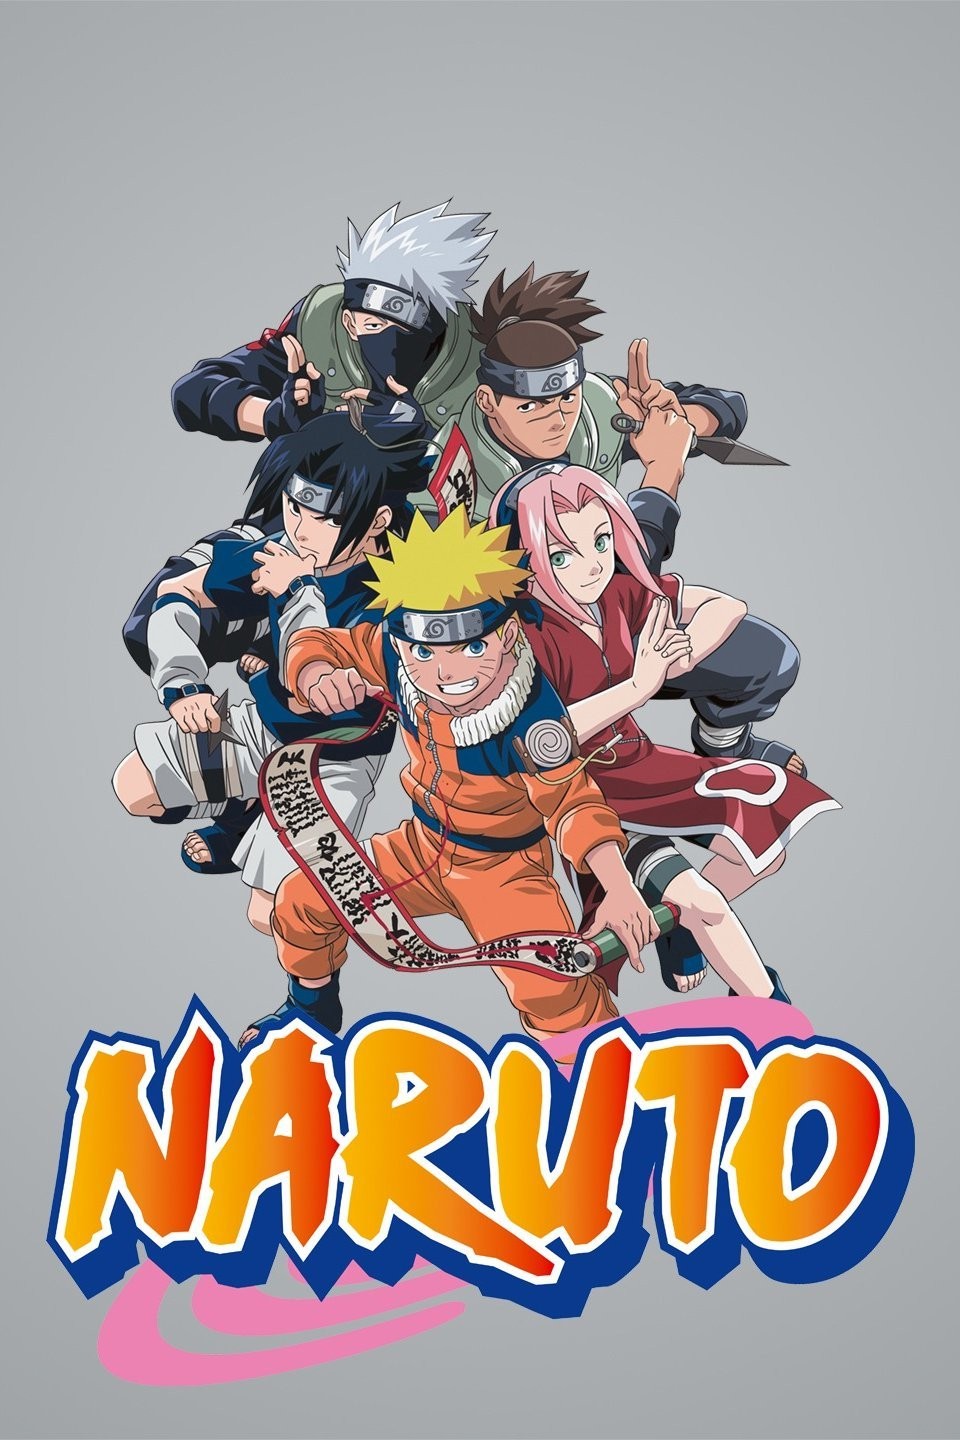 Google Show Me A Picture Of Naruto aviatorgaming youtube